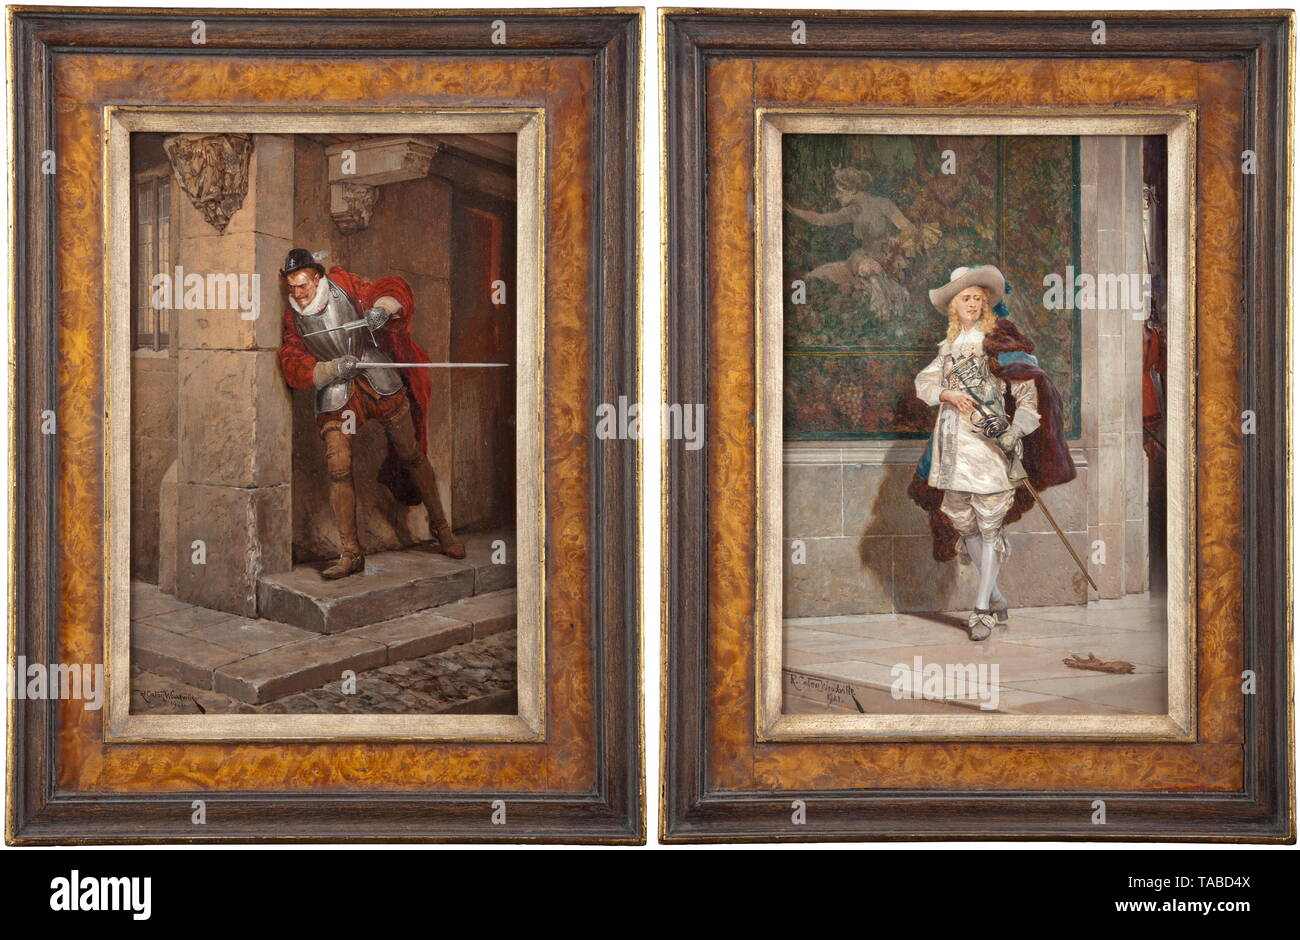 Richard Caton-Woodville jr. (1856 - 1927) - two paintings Oil on wood, both in partially gilt profile frames. Image dimensions each 19 x 27 cm, framed dimensions 27 x 36 cm. 'Die Herausforderung' (tr. 'The Challenge'): depiction of a courtier from the time of King Charles I (1600 - 1649) reaching for his sword, his eyes fixed on a thrown-down glove. 'Der Angreifer' (tr. 'The Assailant'): depiction of a figure lurking in ambush, wearing half-armour and armed with a bell rapier and a left-handed dagger. Caton-Woodville was raised in St. Petersburg,, Additional-Rights-Clearance-Info-Not-Available Stock Photo